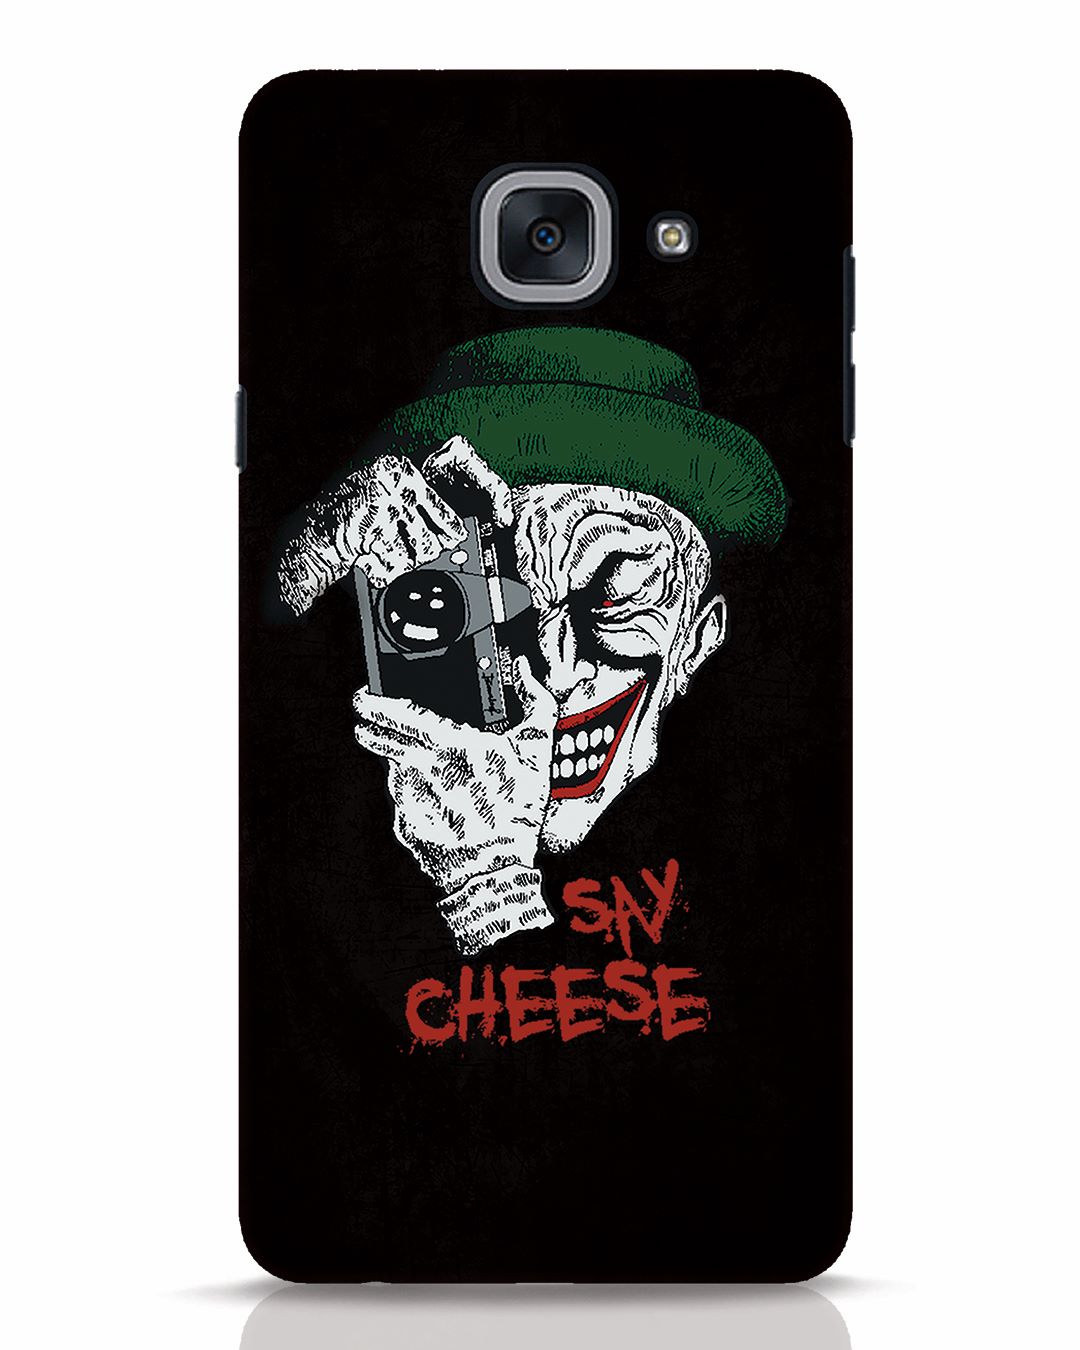 Say Cheese Samsung Galaxy On Max Mobile Cover Samsung Galaxy On Max Mobile Covers Bewakoof.com